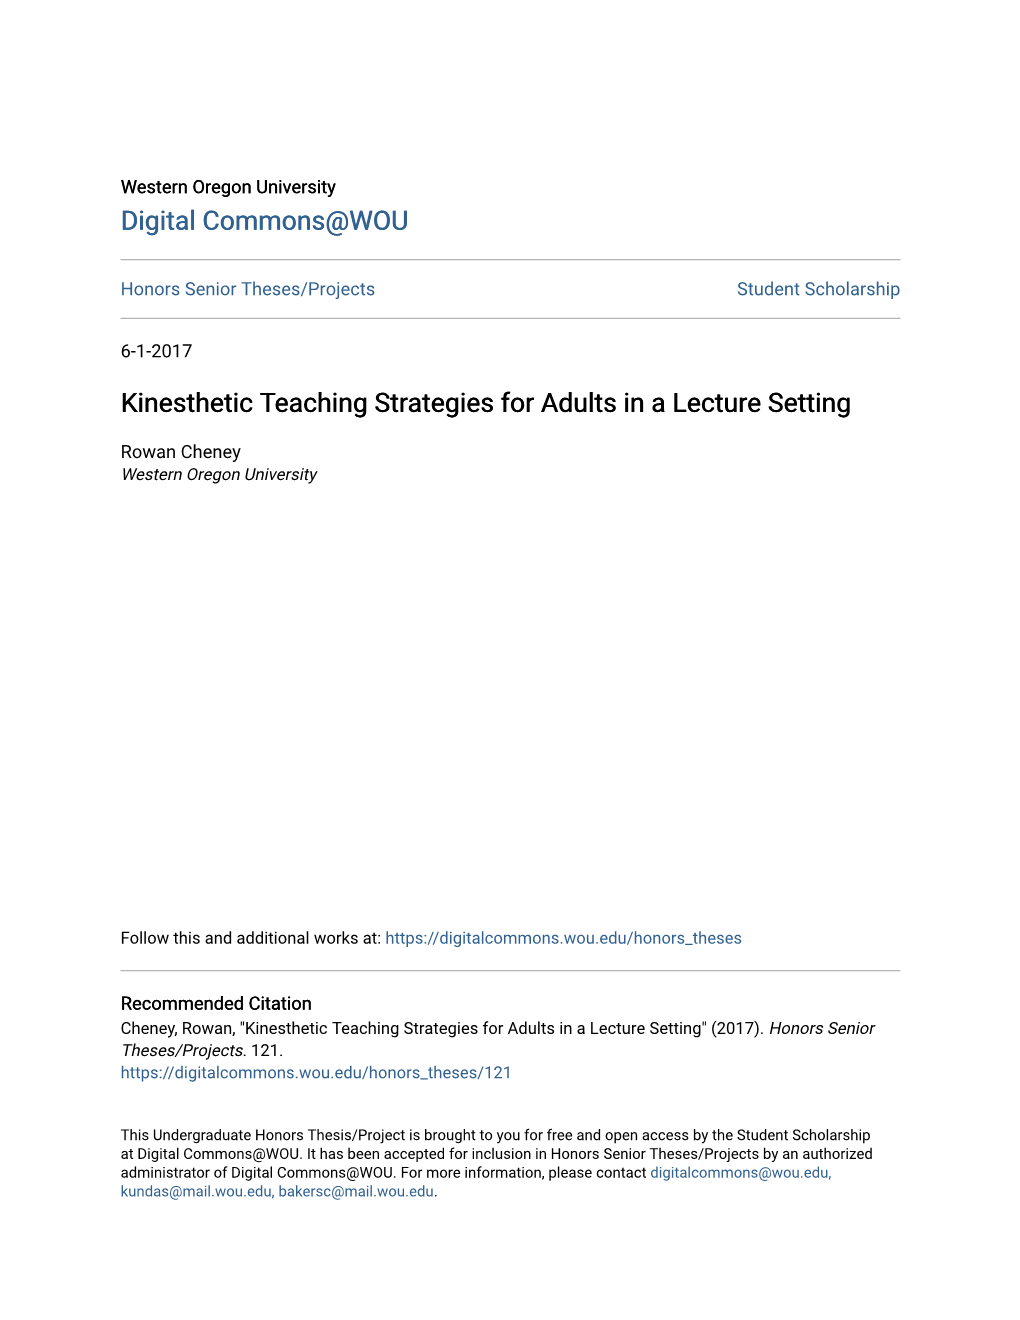 Kinesthetic Teaching Strategies for Adults in a Lecture Setting